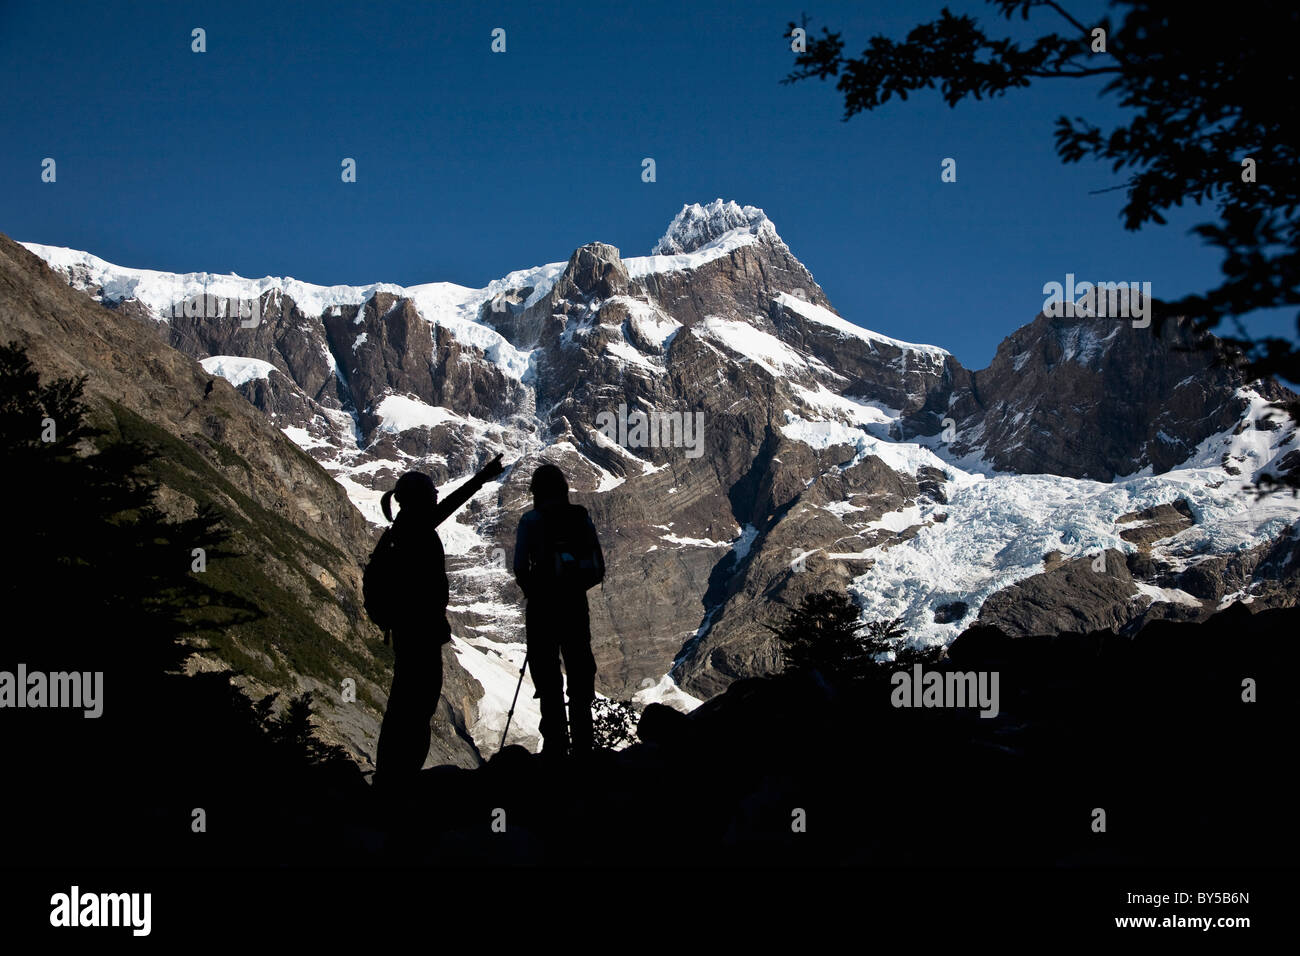 Two people in silhouette standing below snowy mountains, Torres del Paine National Park, Chile Stock Photo